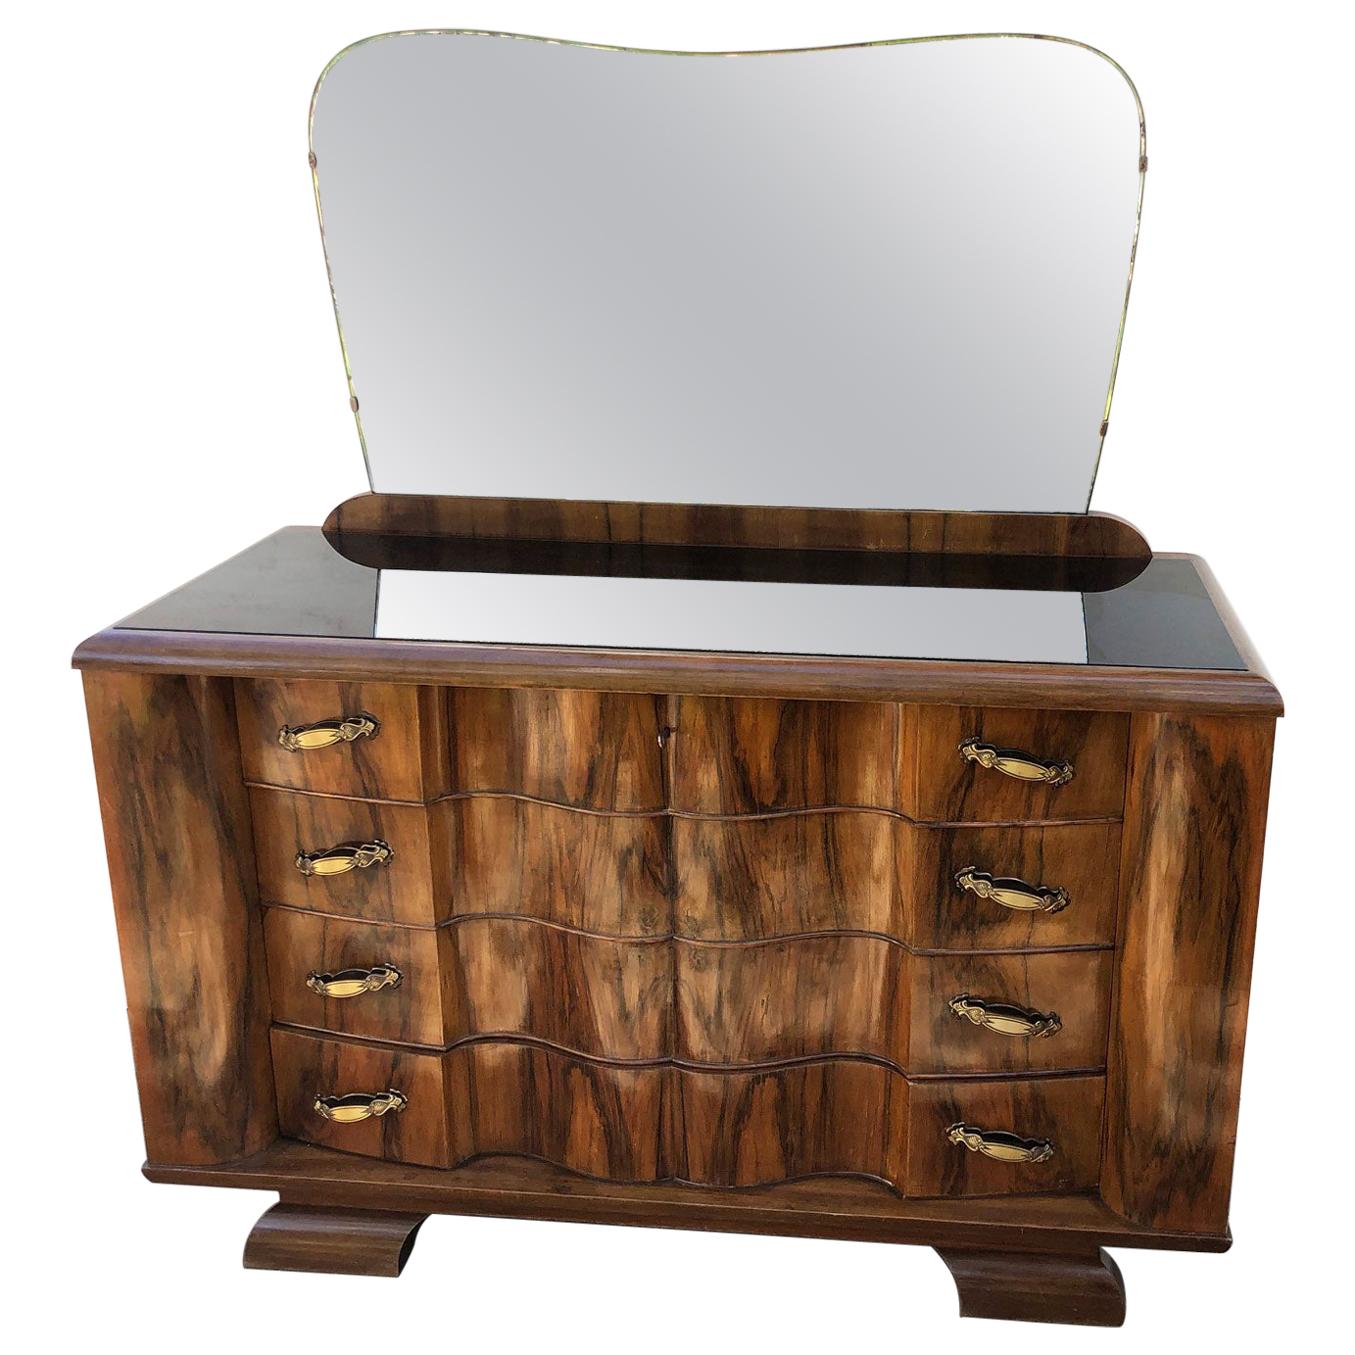 1940's chest of drawers in rosewood and walnut, honeycomb, natural color, original Italian design, black glass top, shaped mirror part.
From the same series in the shop there are ads for a chest of drawers and a pair of bedside tables.
They will be